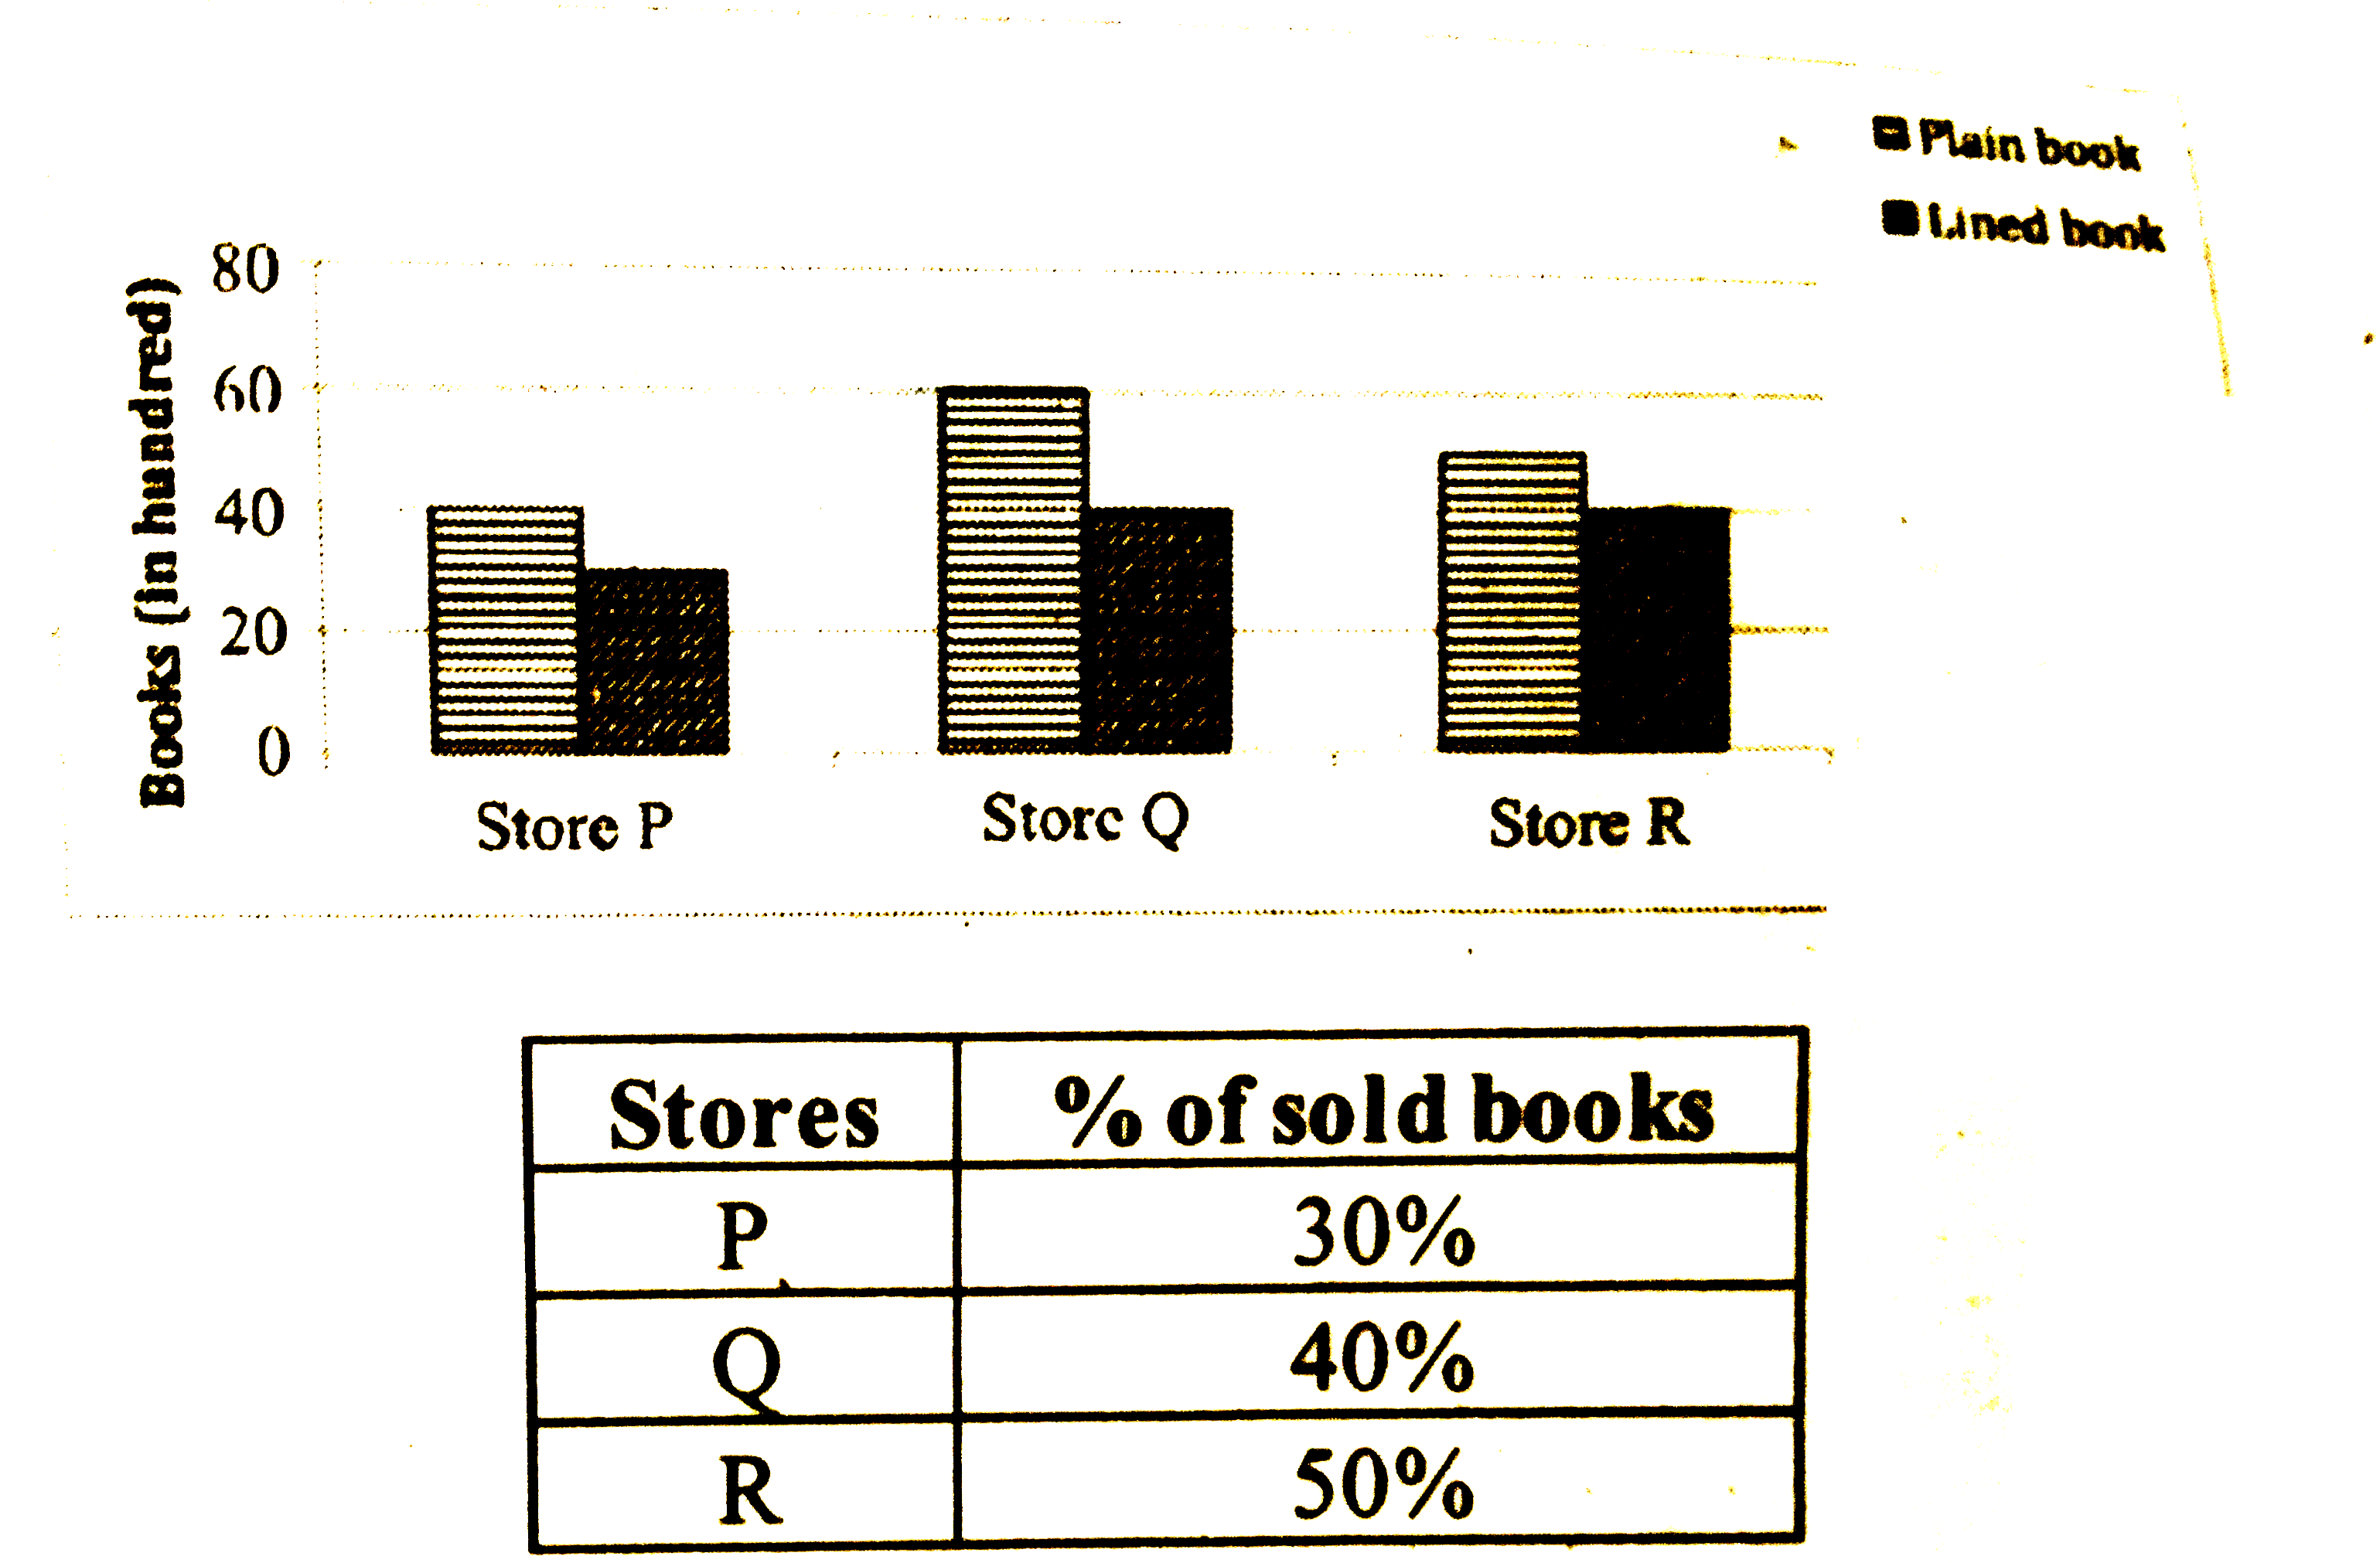 Ratio of sold plain and lined books for store R is 5:3 and for store Q is 4:3 . Then the find the total plain books sold by these two stores together ?